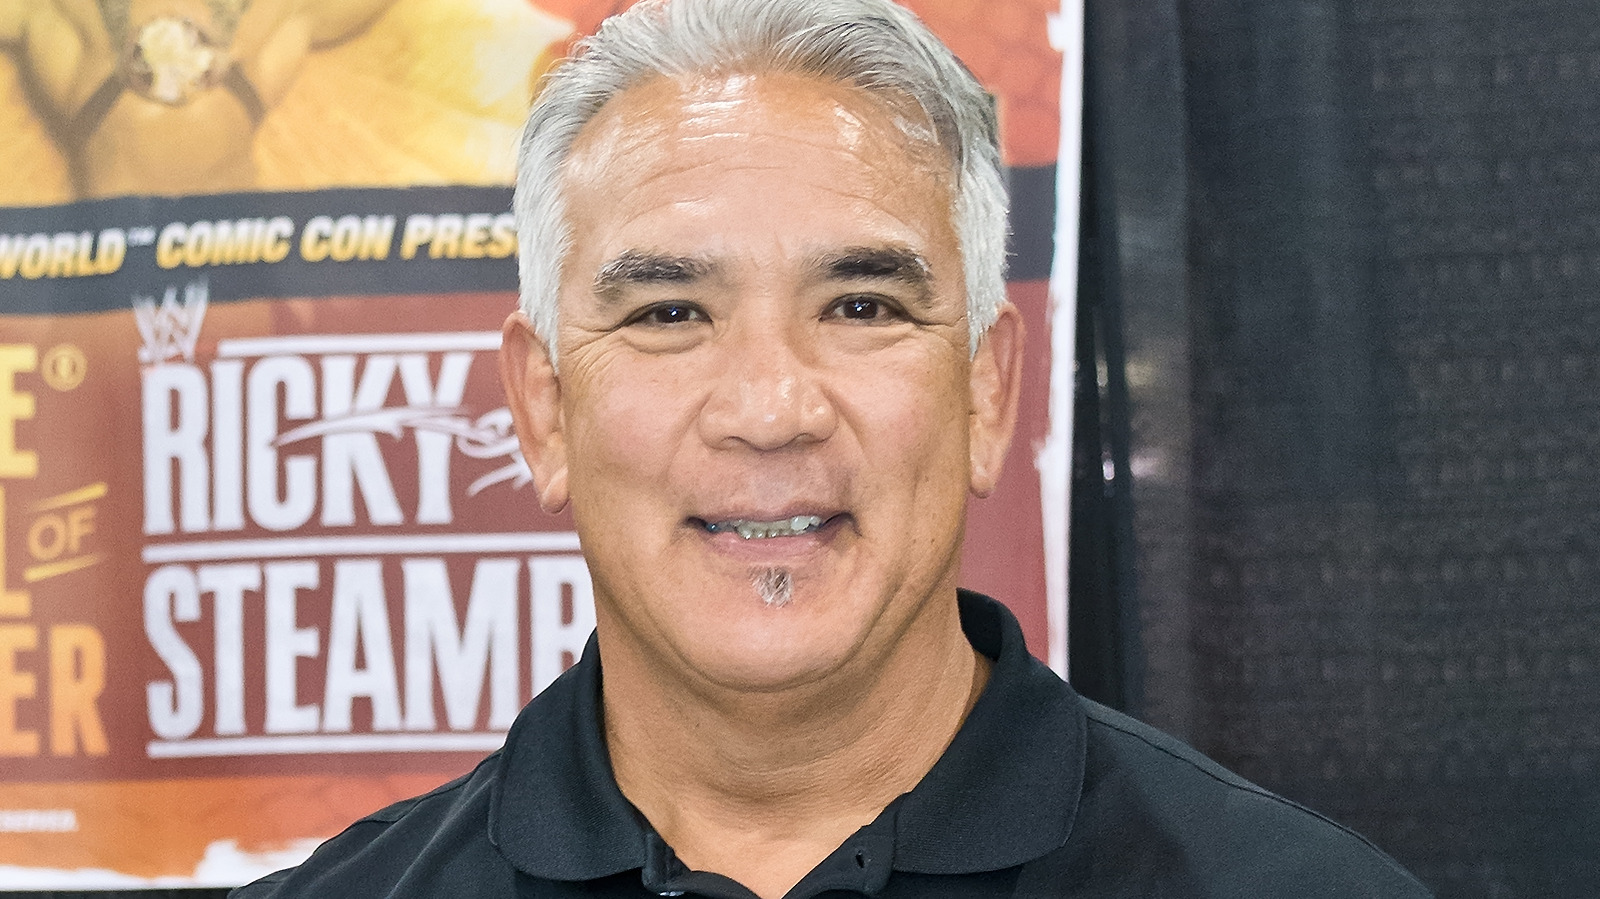 AEW Tried To Recruit Ricky Steamboat, But He Didn't Want To Be On The Road